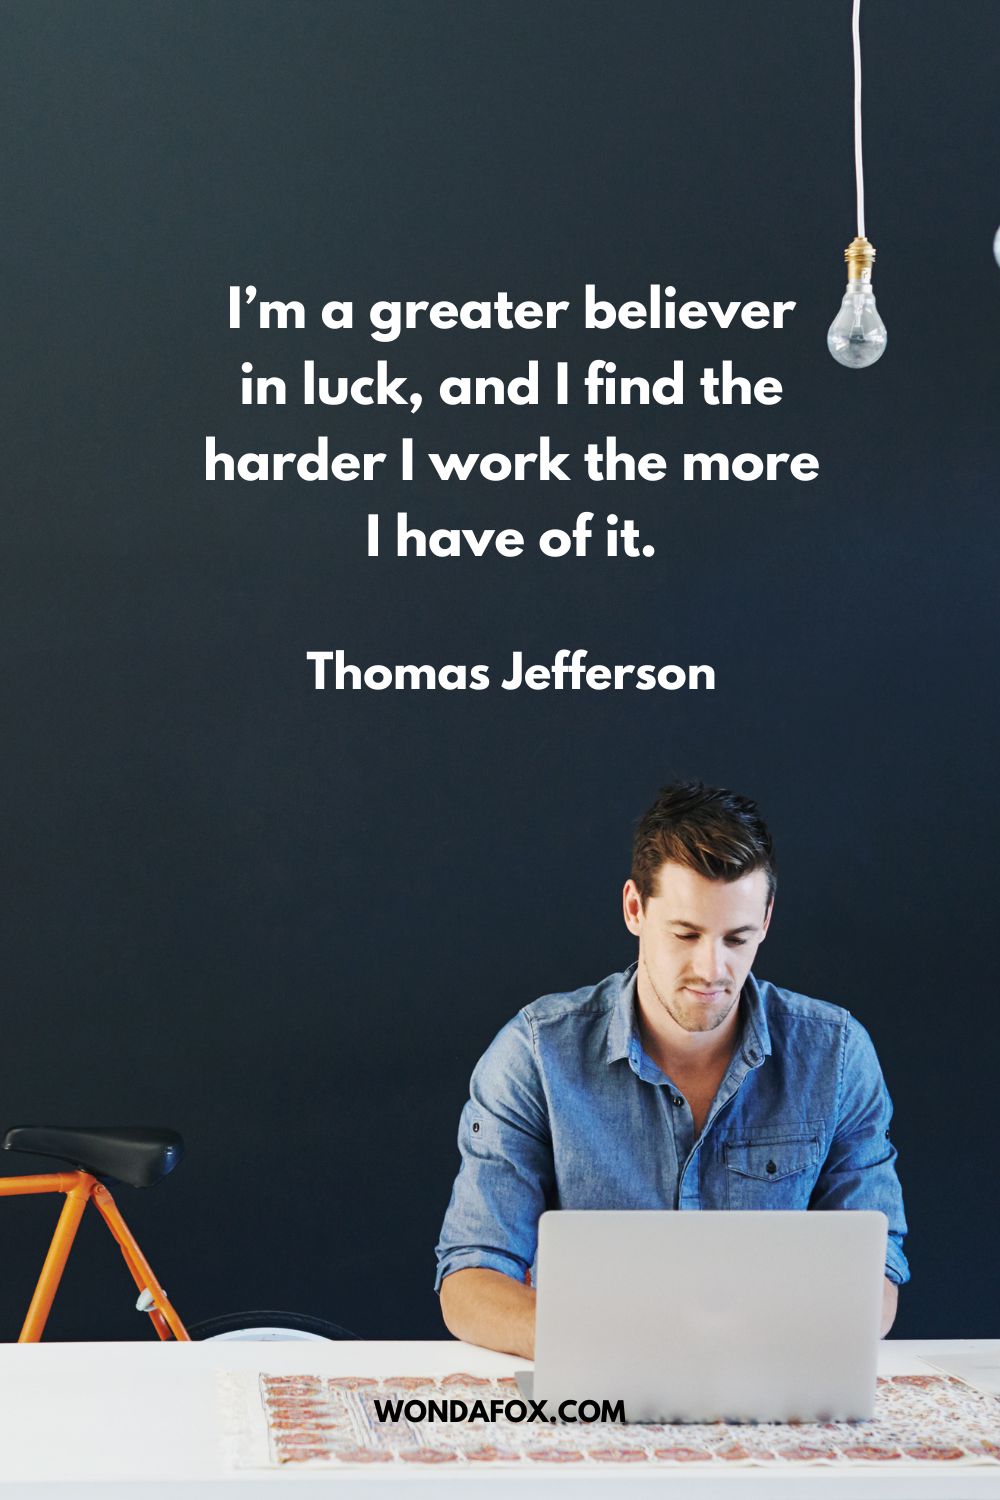 I’m a greater believer in luck, and I find the harder I work the more I have of it. Thomas Jefferson